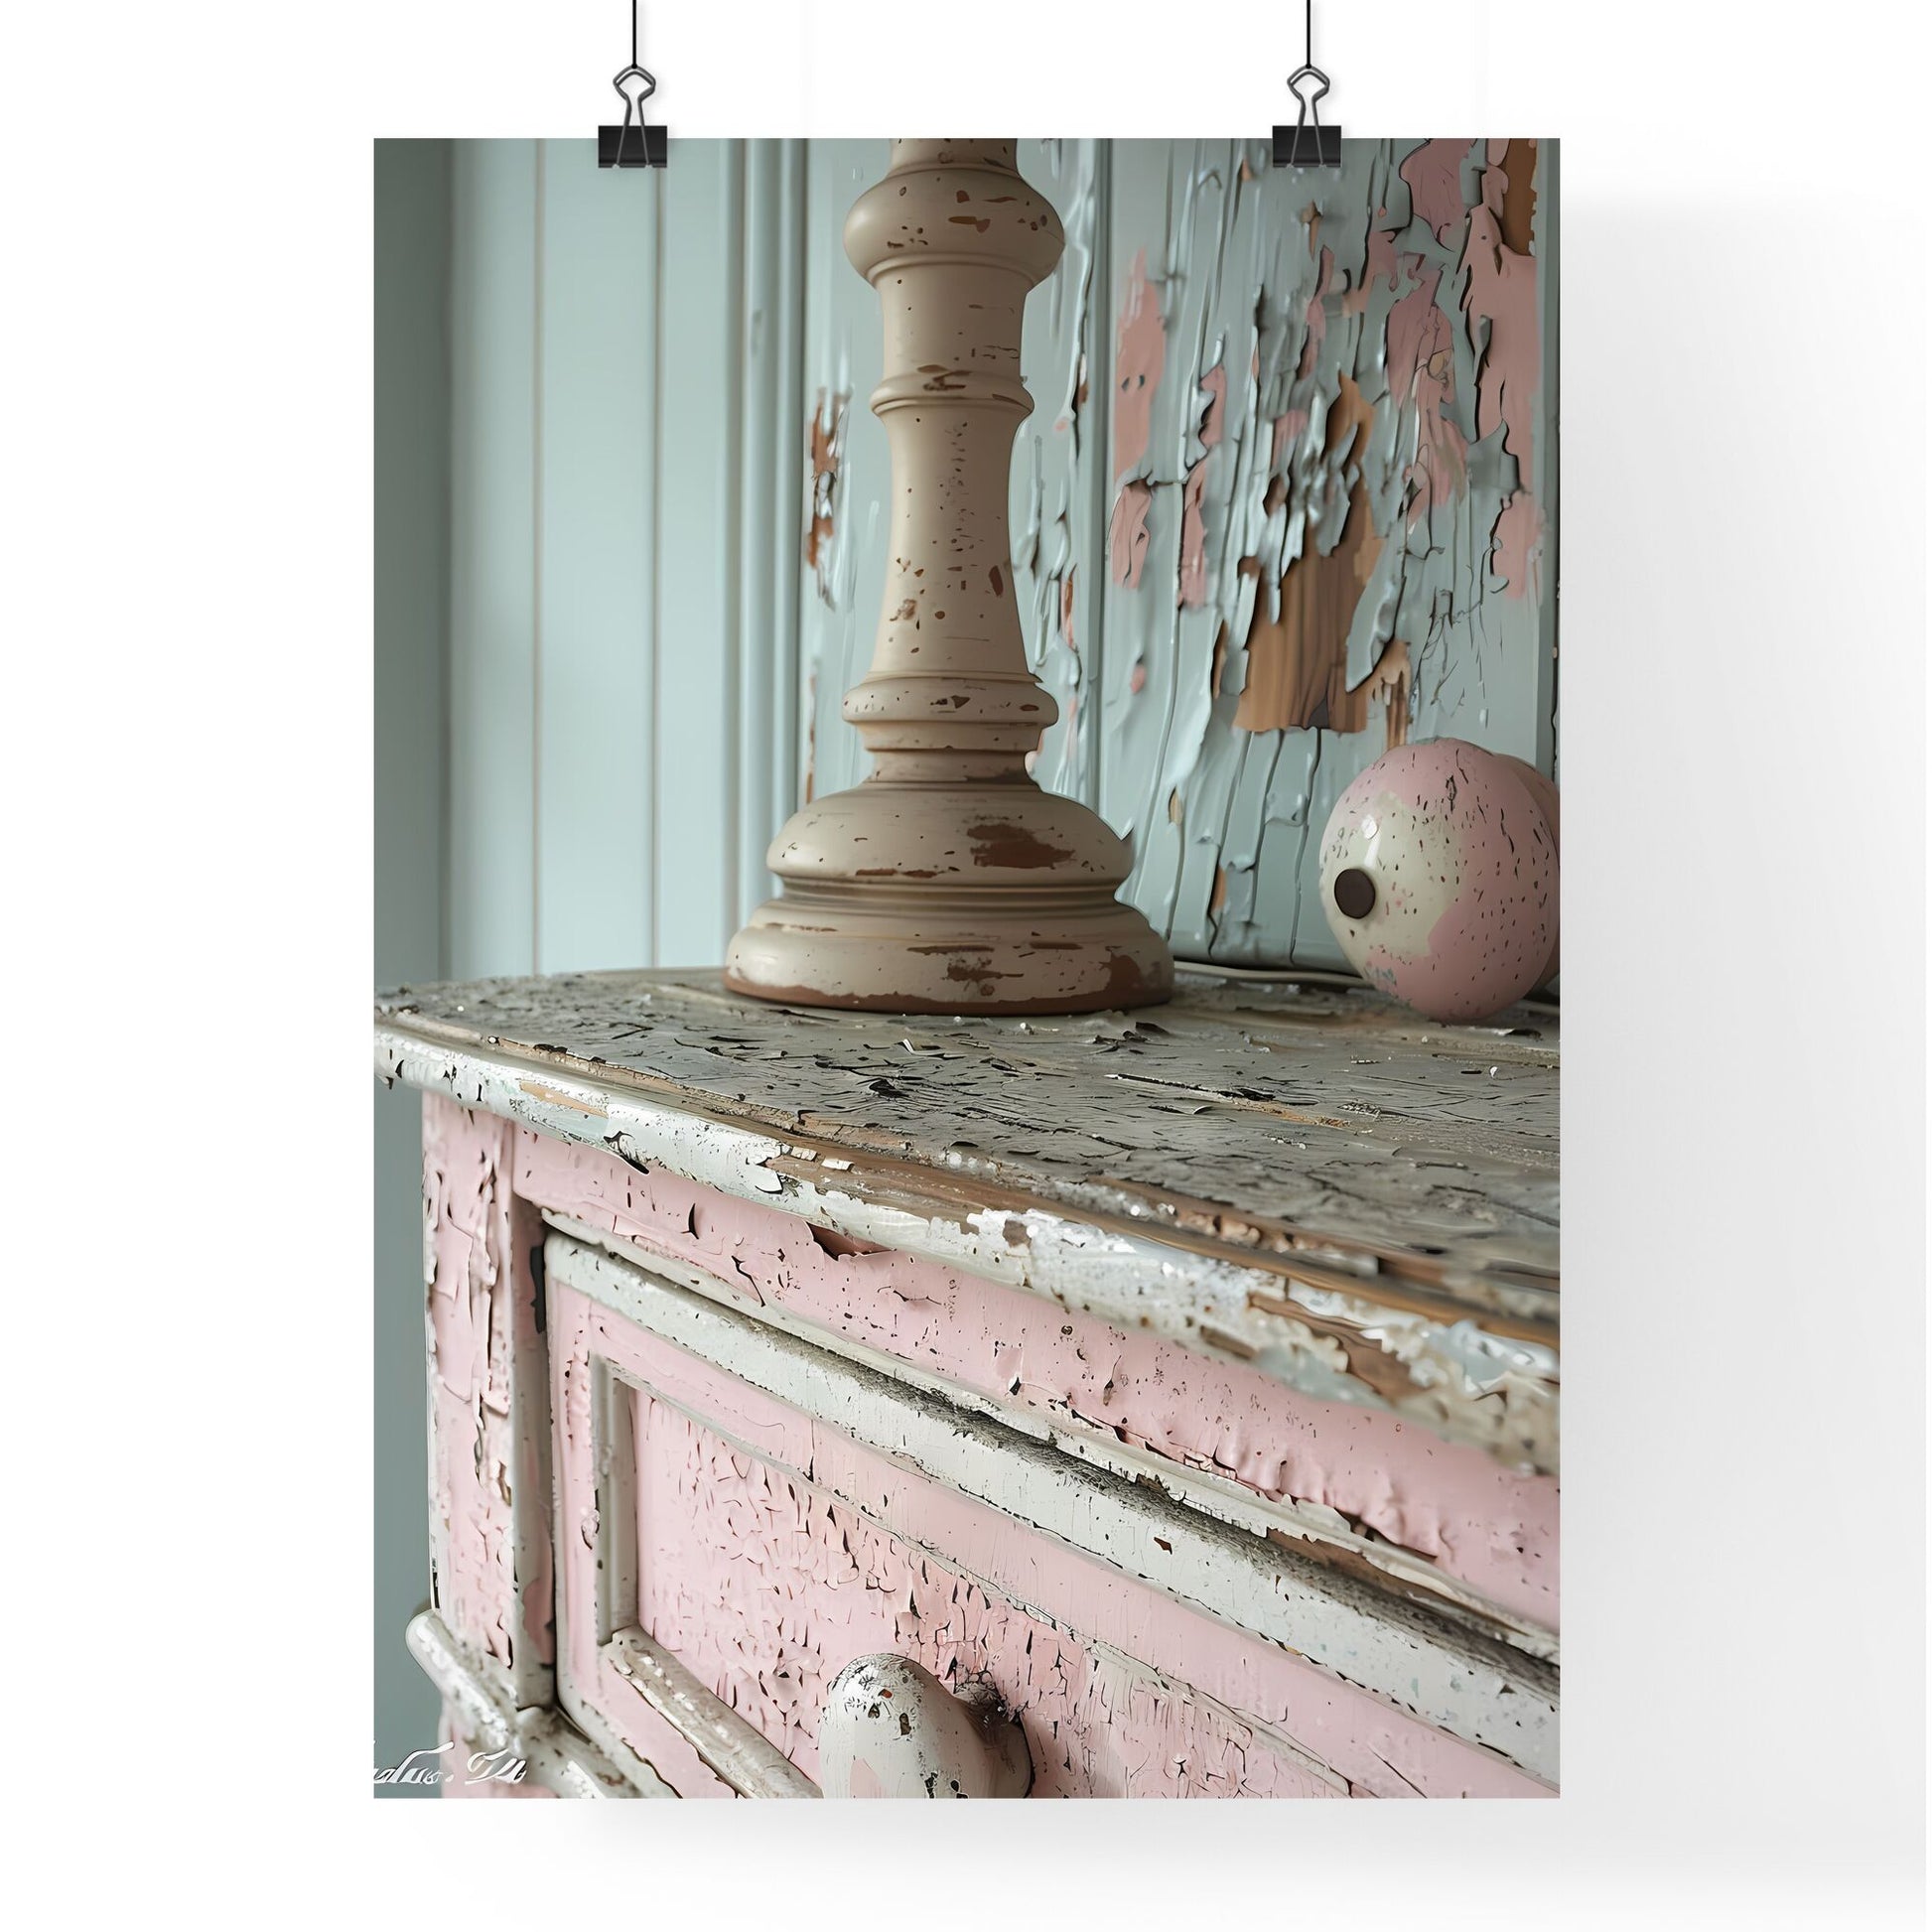 Rustic Vintage Shabby Chic Bathroom Cabinet with Light Pastel Painted Details Default Title